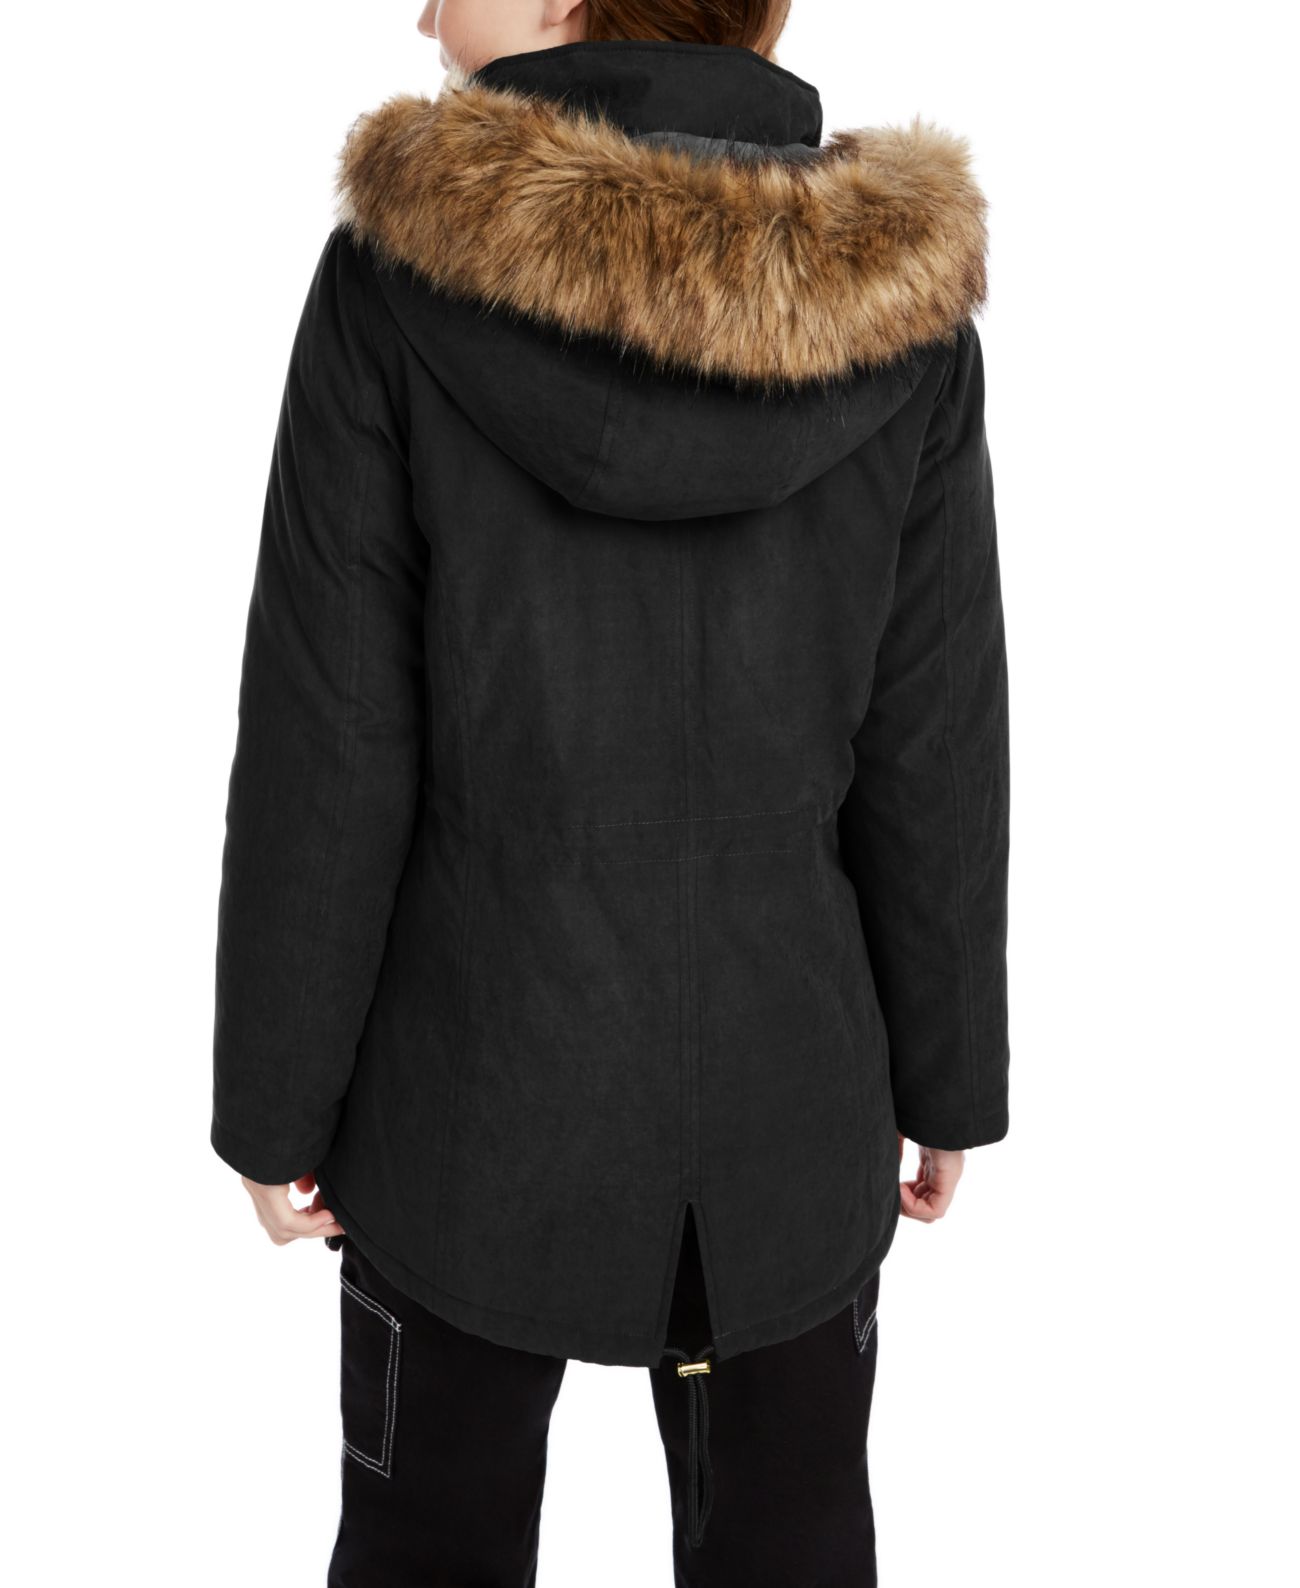 Celebrity Pink Juniors&#8217; Faux-Fur Trim Hooded Parka Coats, Black, Small - image 2 of 4